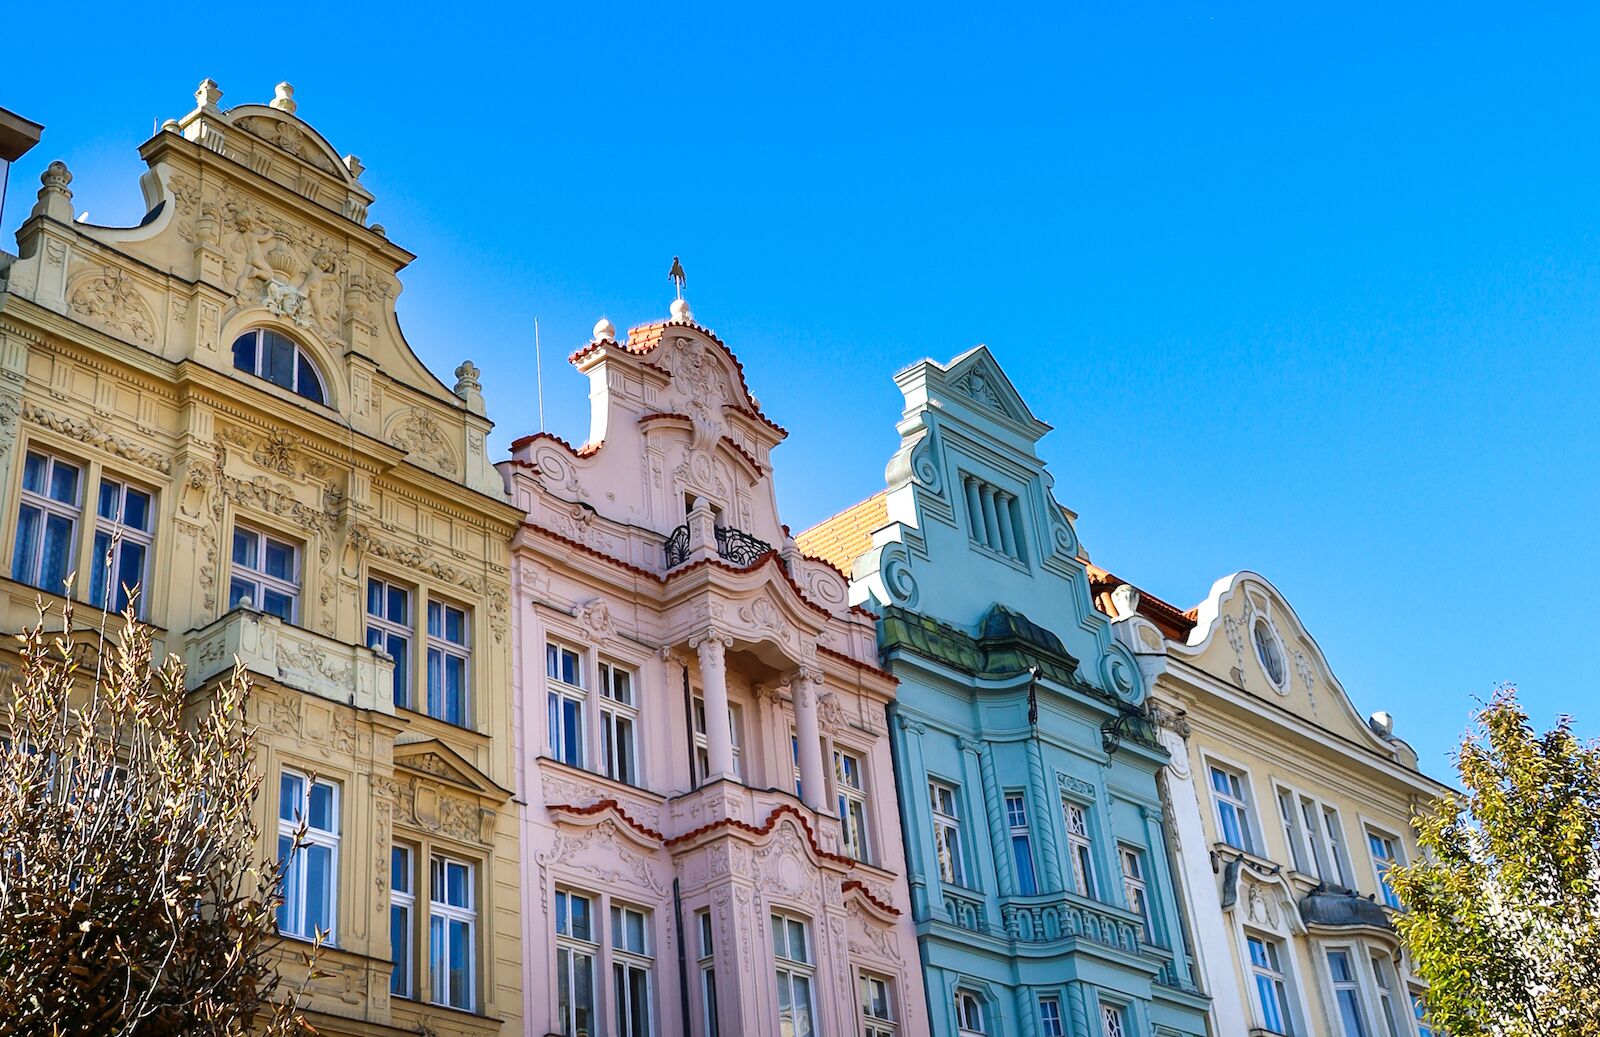 Pastel covered buildings in Pilsen, a town outside of Prague